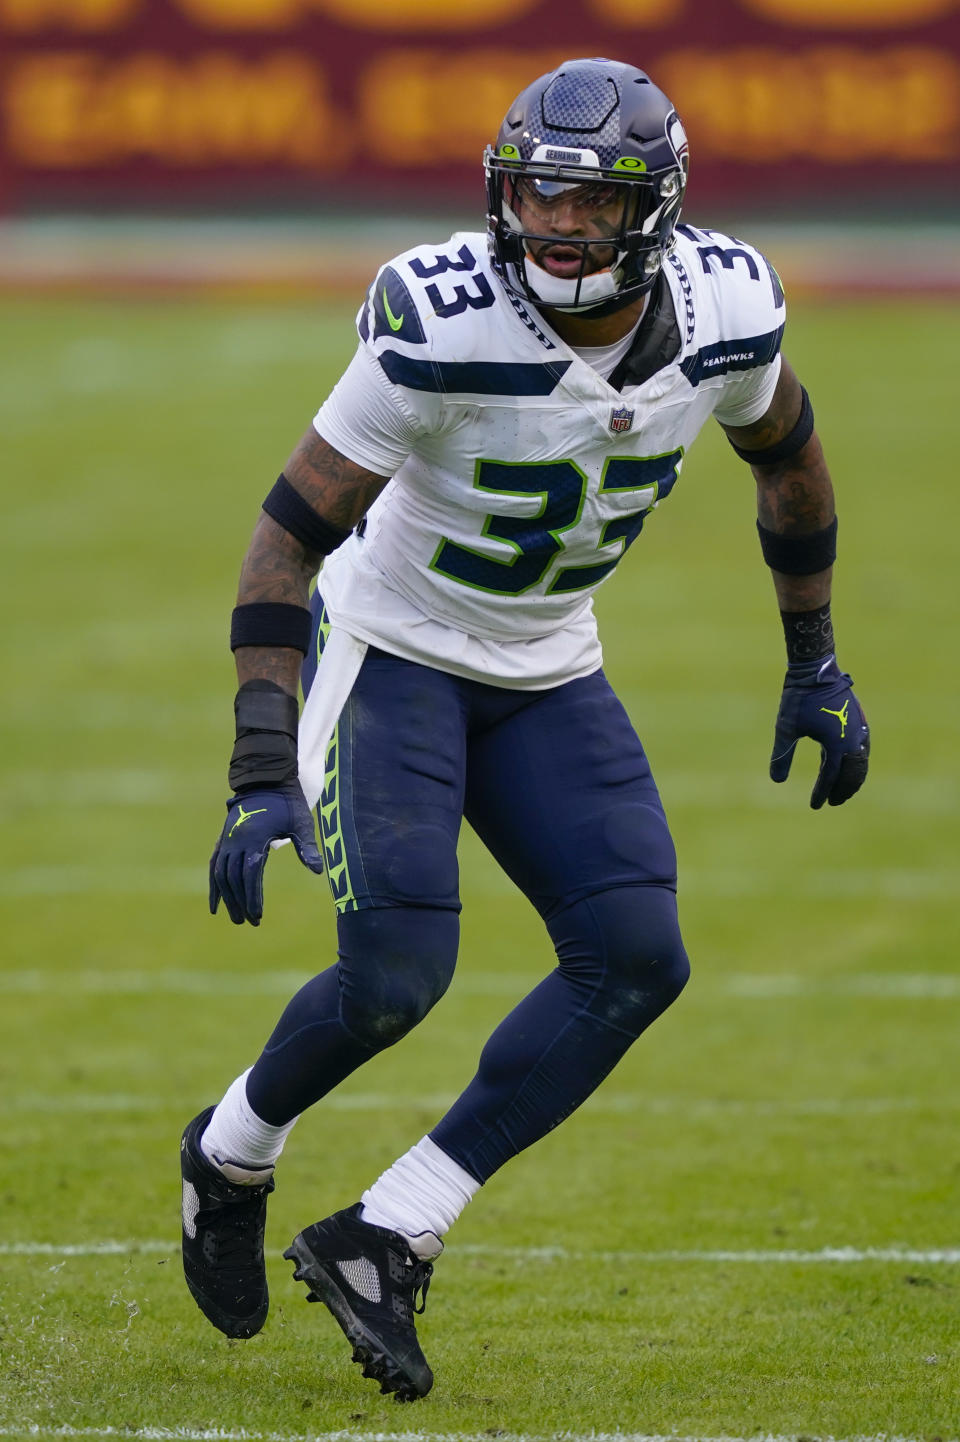 Seattle Seahawks strong safety Jamal Adams (33) during the second half of an NFL football game against the Washington Football Team, Sunday, Dec. 20, 2020, in Landover, Md. (AP Photo/Susan Walsh)